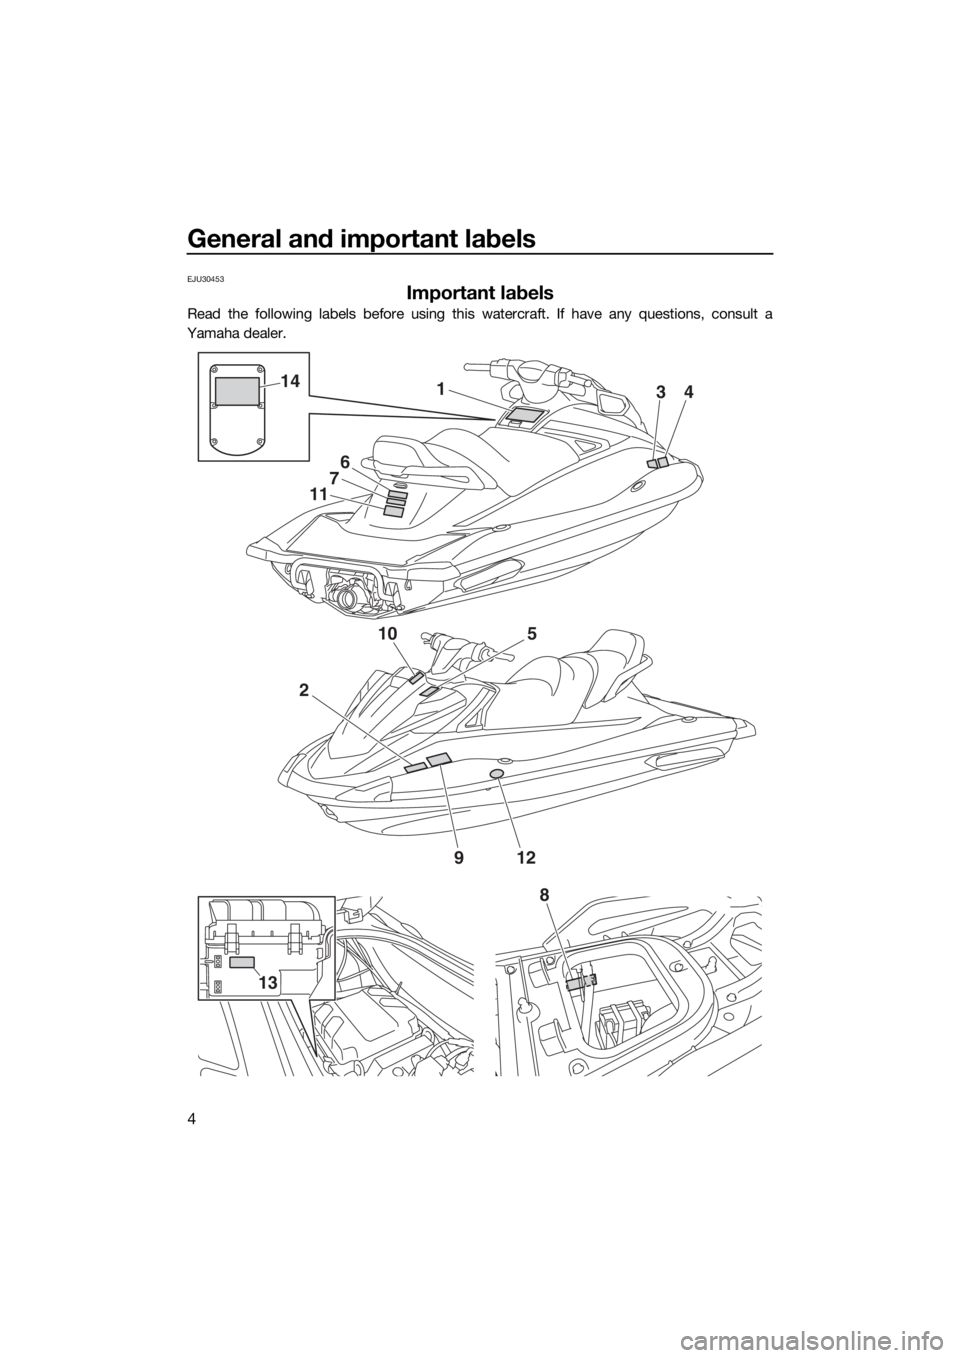 YAMAHA VX DELUXE 2017  Owners Manual General and important labels
4
EJU30453
Important labels
Read the following labels before using this watercraft. If have any questions, consult a
Yamaha dealer.
2
10
1
6
7
11
34
5
912
14
8
13
UF4G71E0